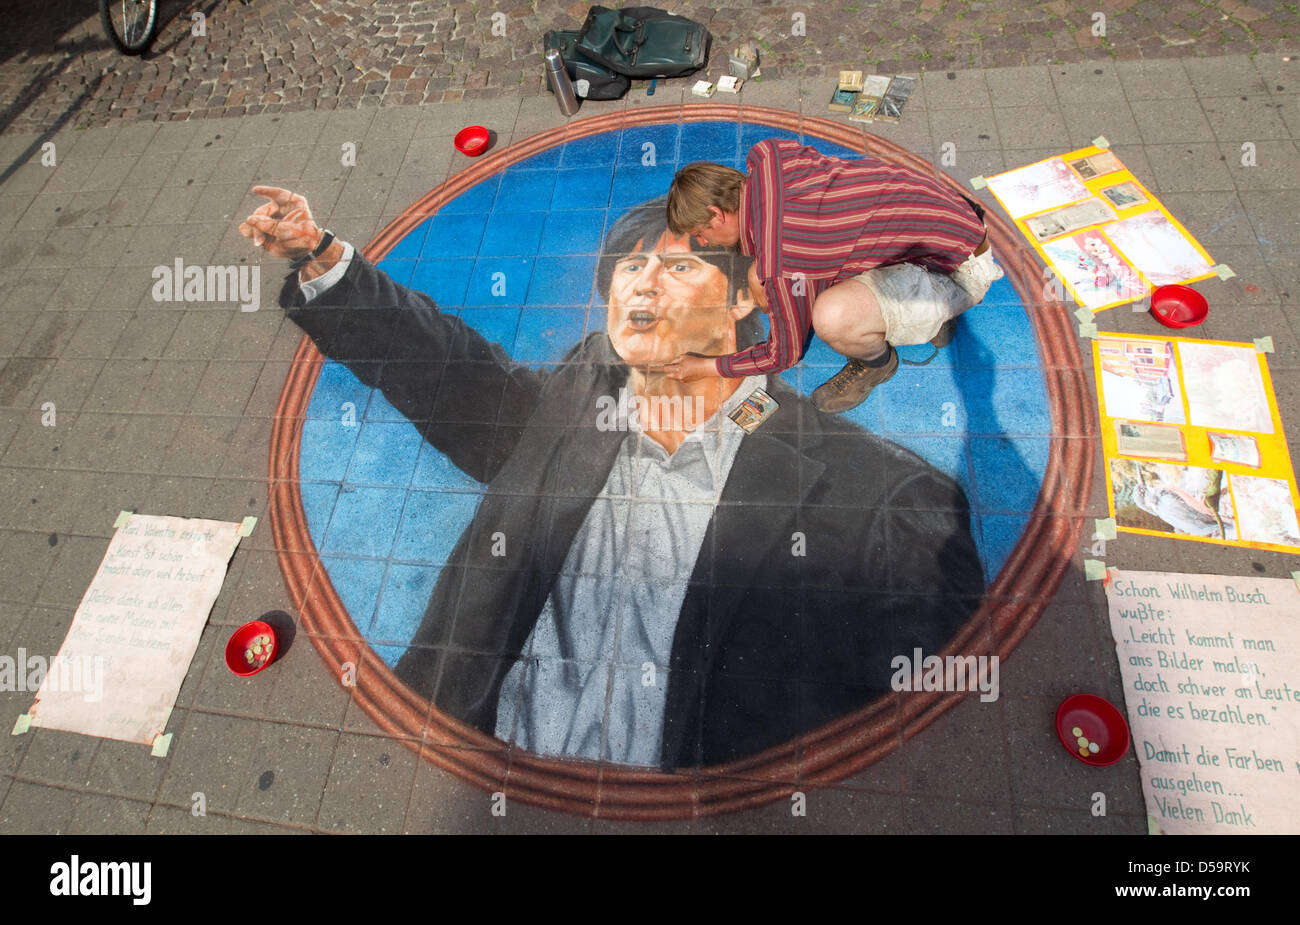 The street artist Ulrich Zessin paints a picture of the German national team's soccer coach Joachim Loew on a pavement in Muenster, Germany on 1 July 2010. It took the artist about 30 hours to finish the picture which he painted with pastel chalk. Photo: Friso Gentsch Stock Photo